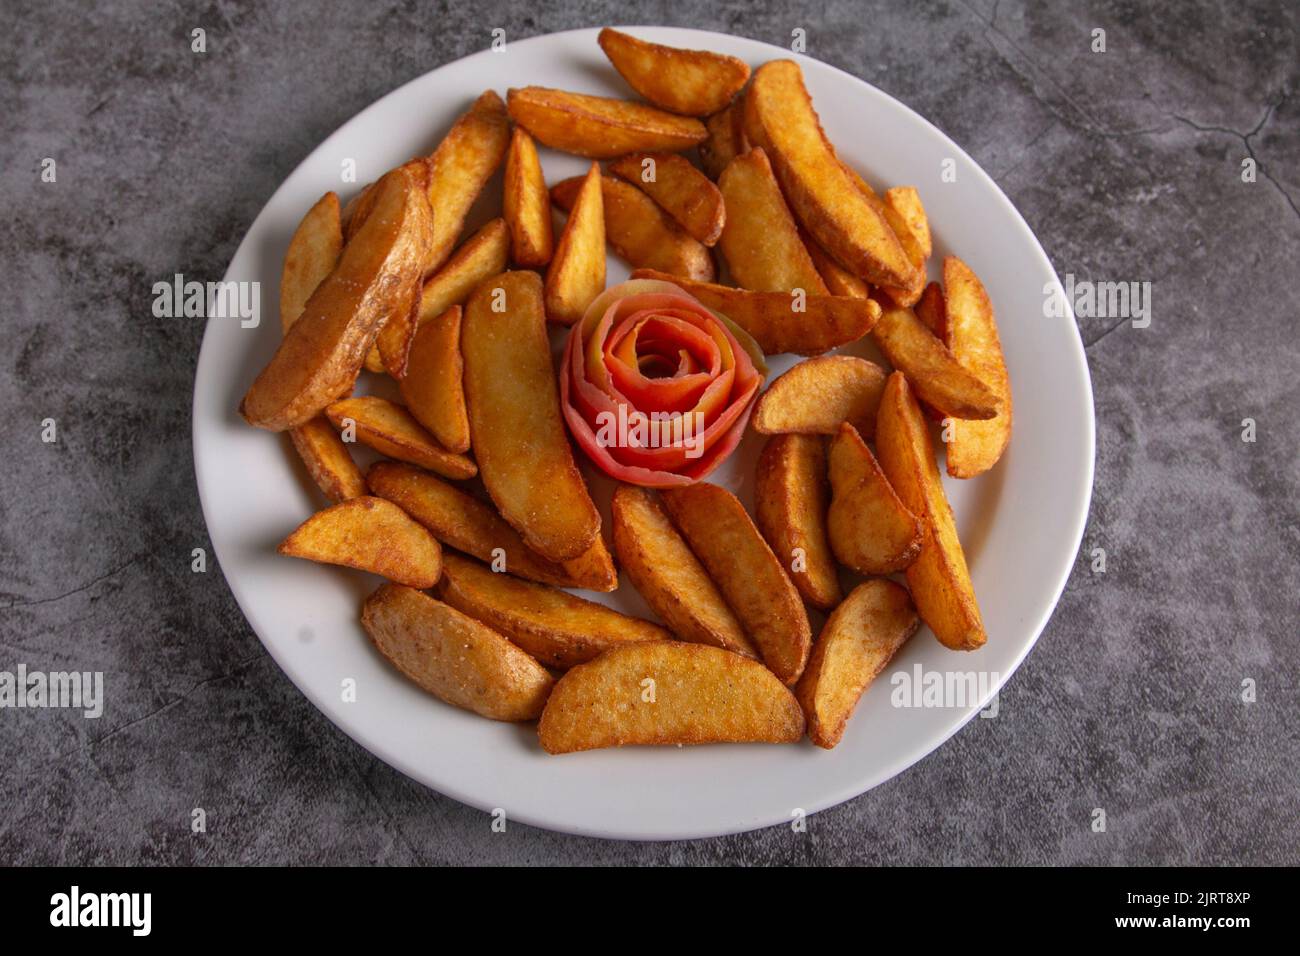 French fries de luxe on a rustic background Stock Photo